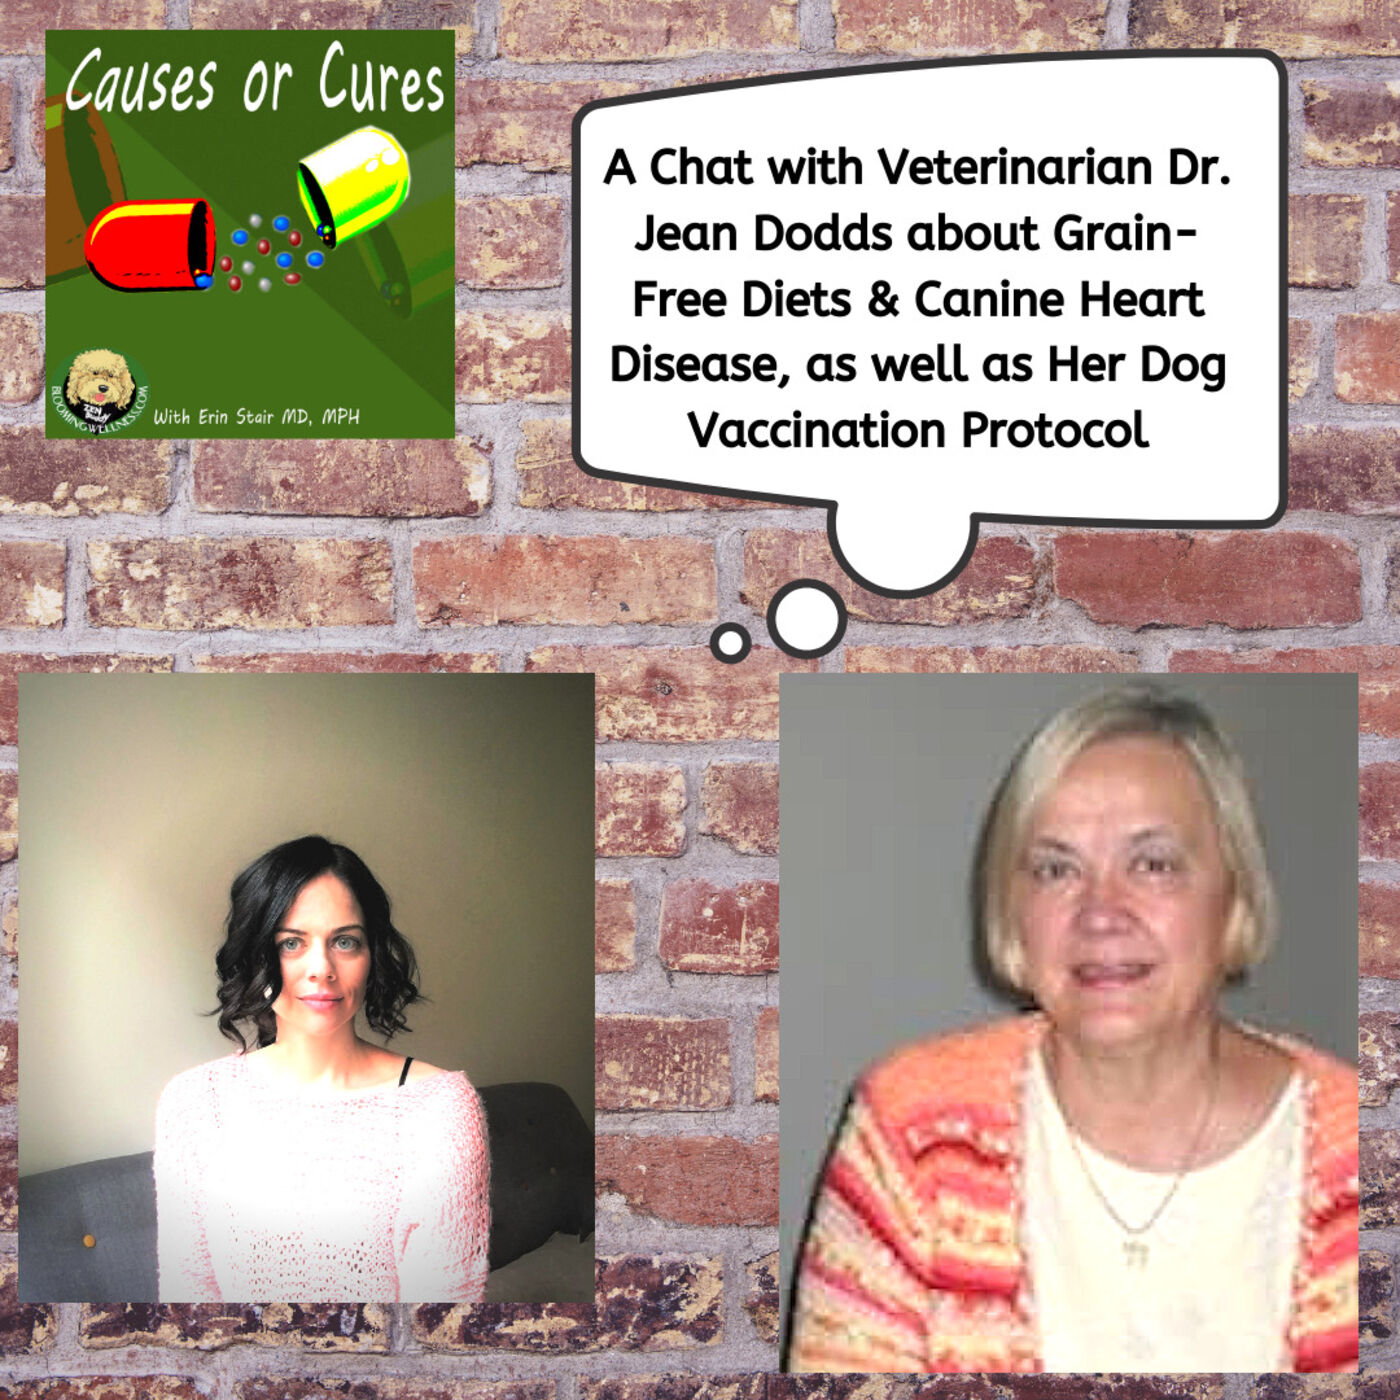 Ark Tekstforfatter Dangle The Grain-Free Diet in Dogs & Dog Vaccination Protocols: An Interview with  Dr. Jean Dodds